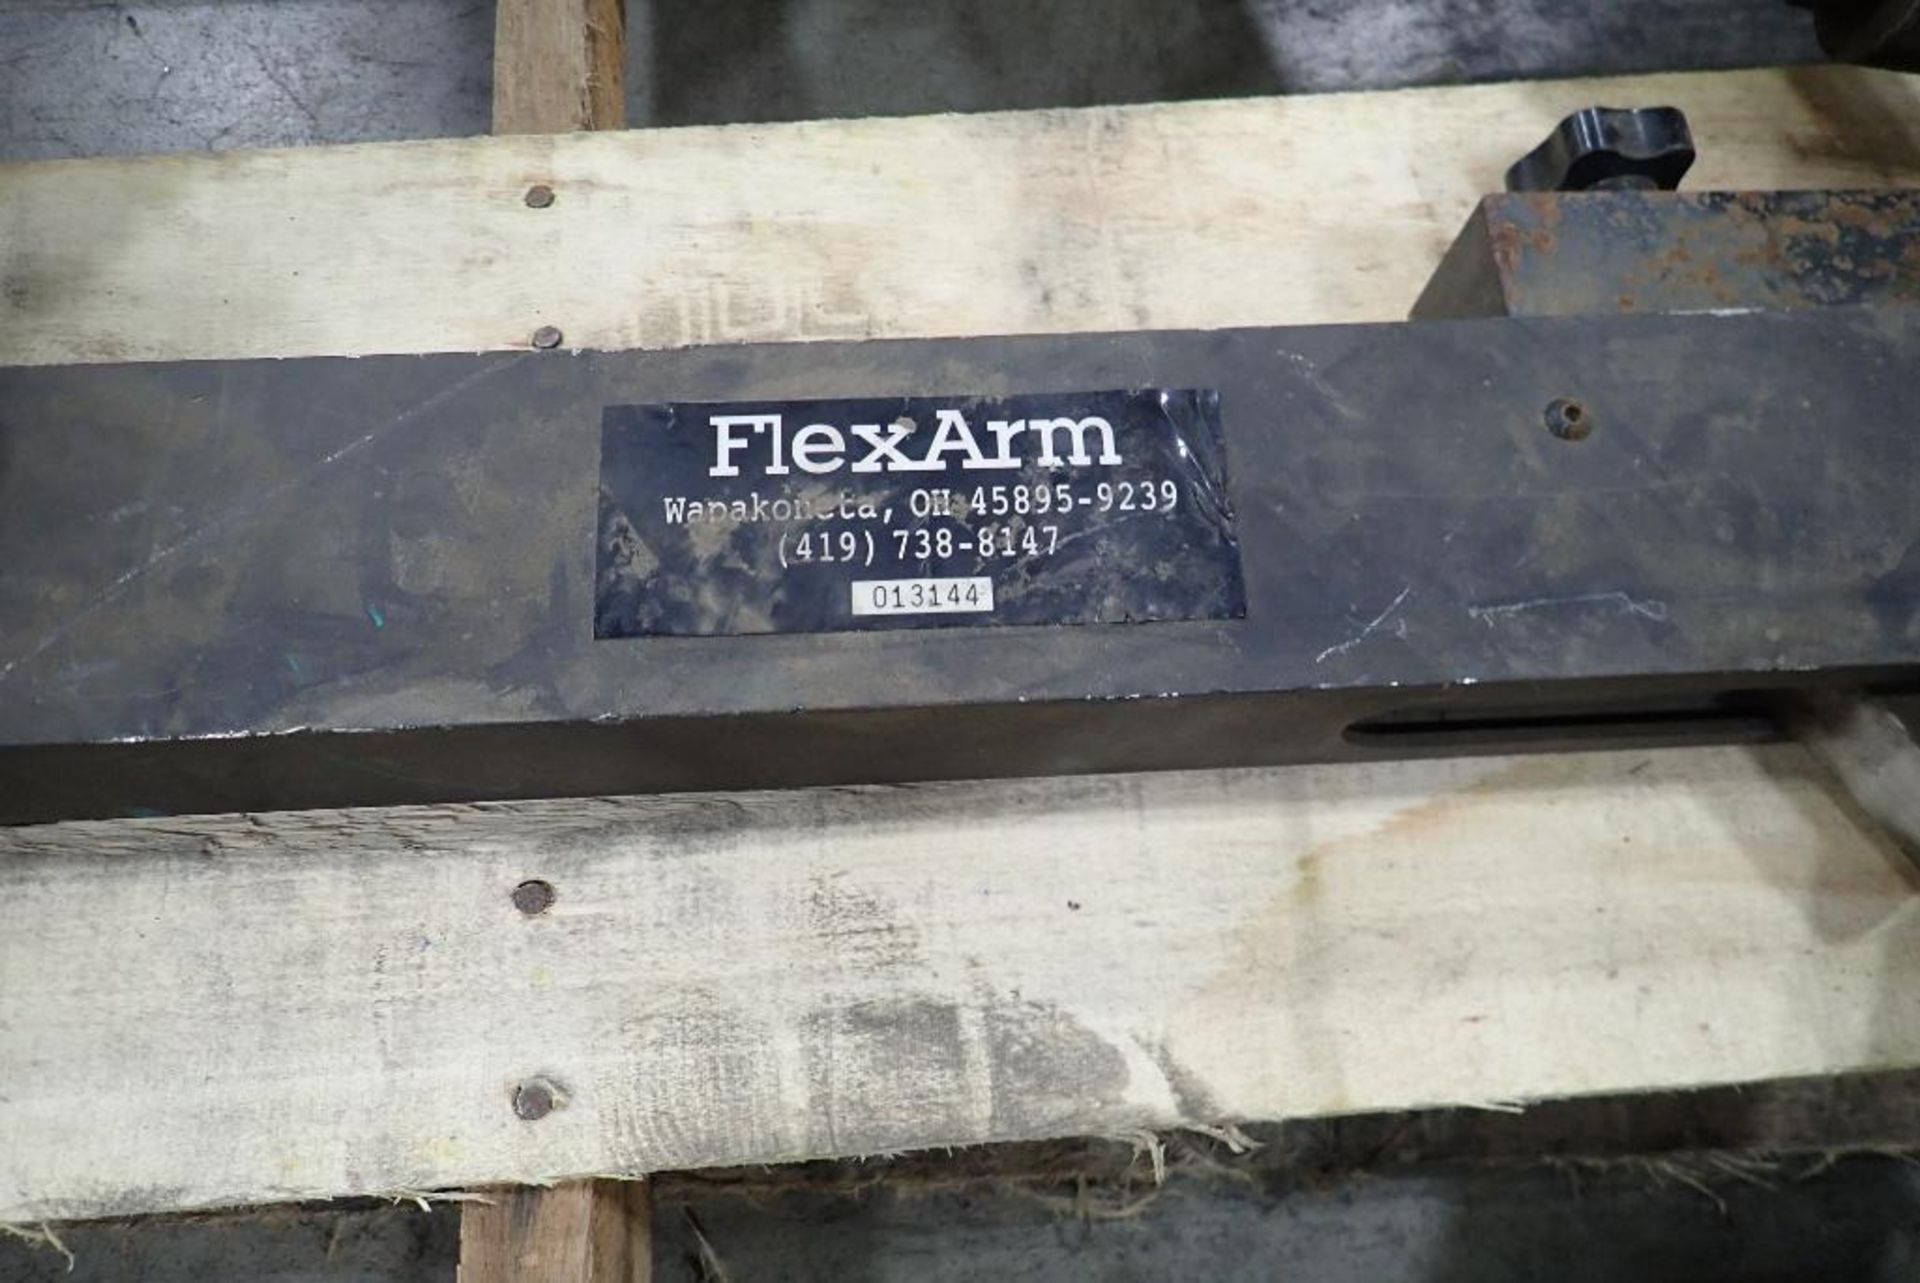 Lot of 2 FlexArm 013144 Tapping Arms - Image 3 of 3